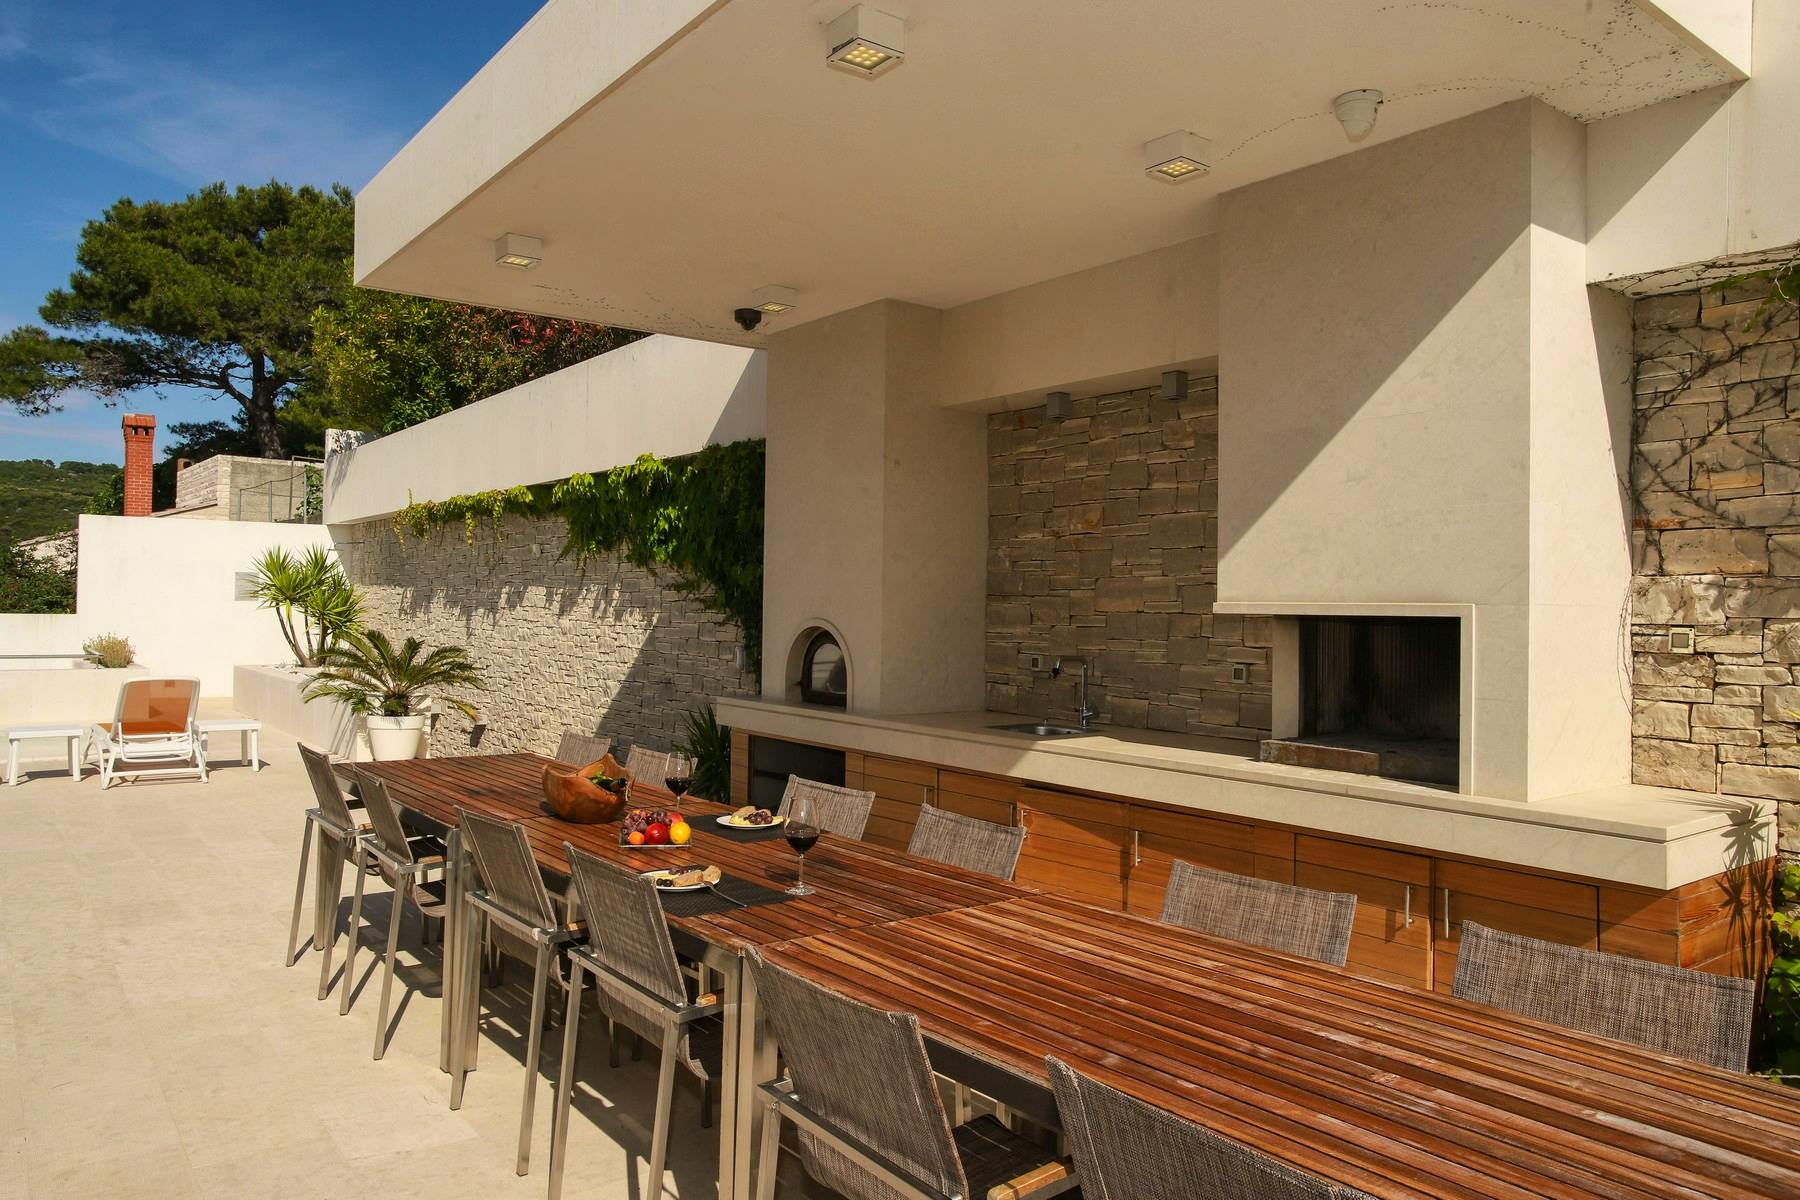 Outside dining area with a grill zone